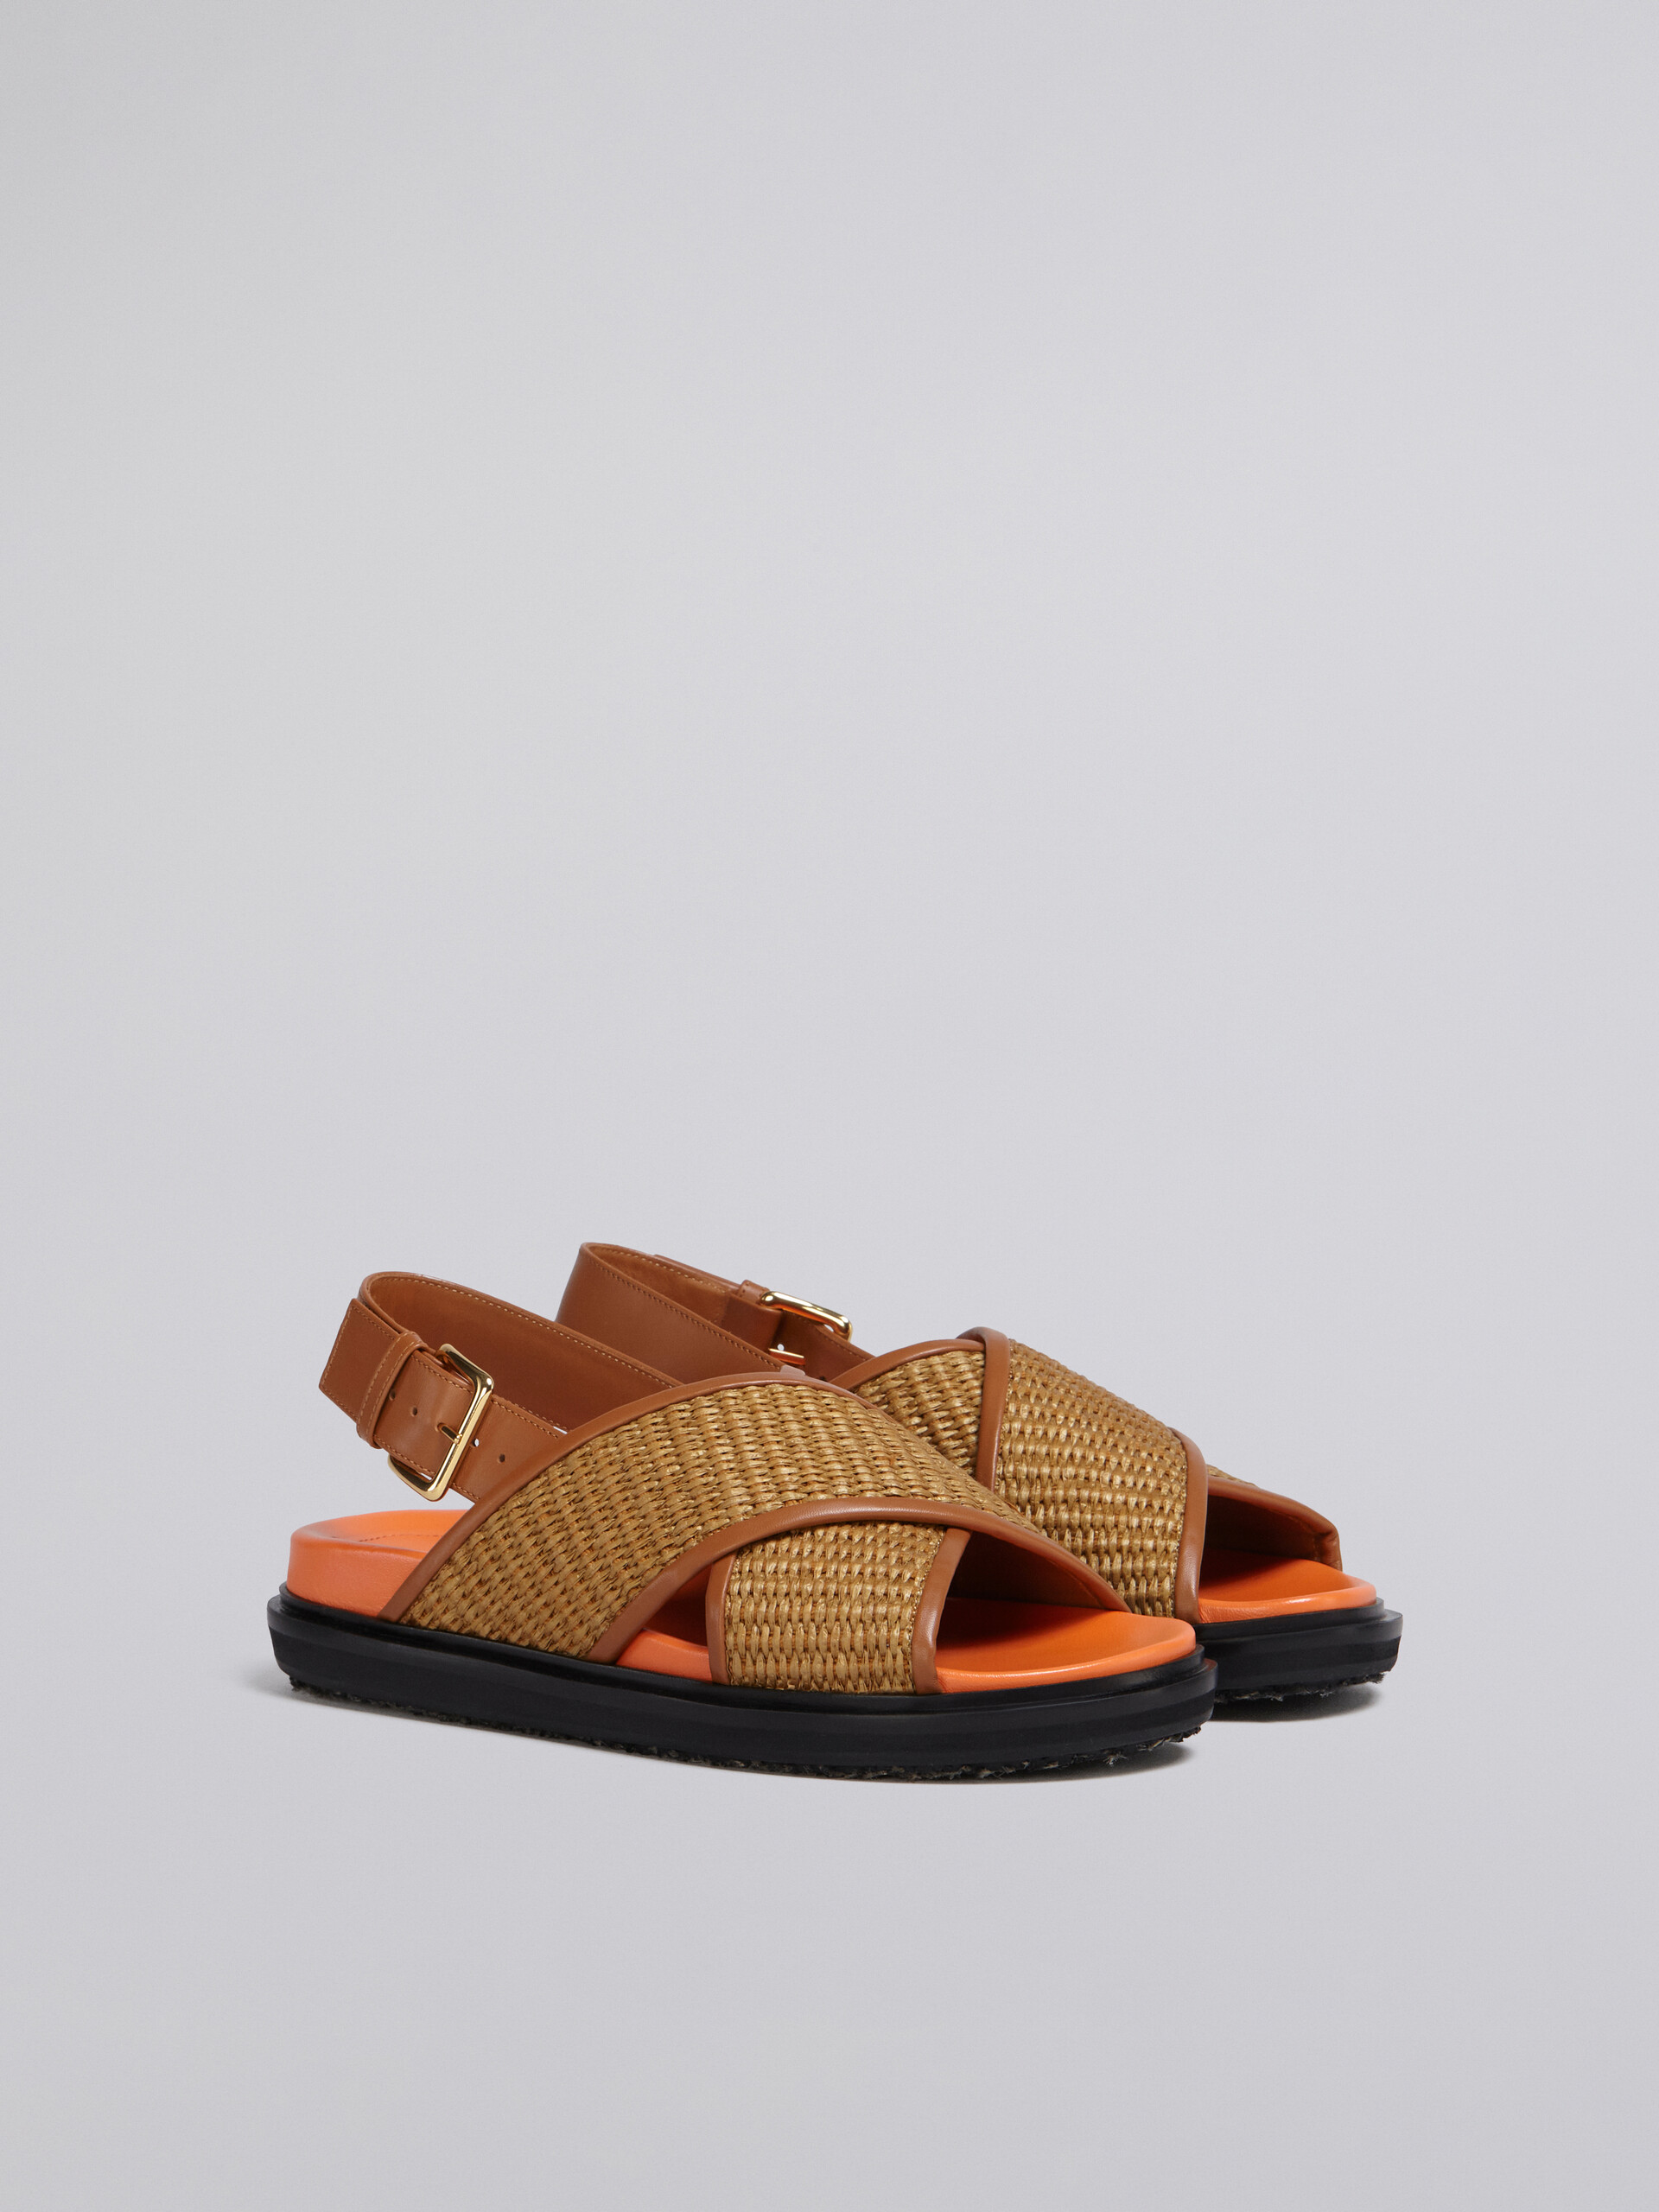 Fussbet sandals in brown leather and raffia-effect fabric - Sandals - Image 2